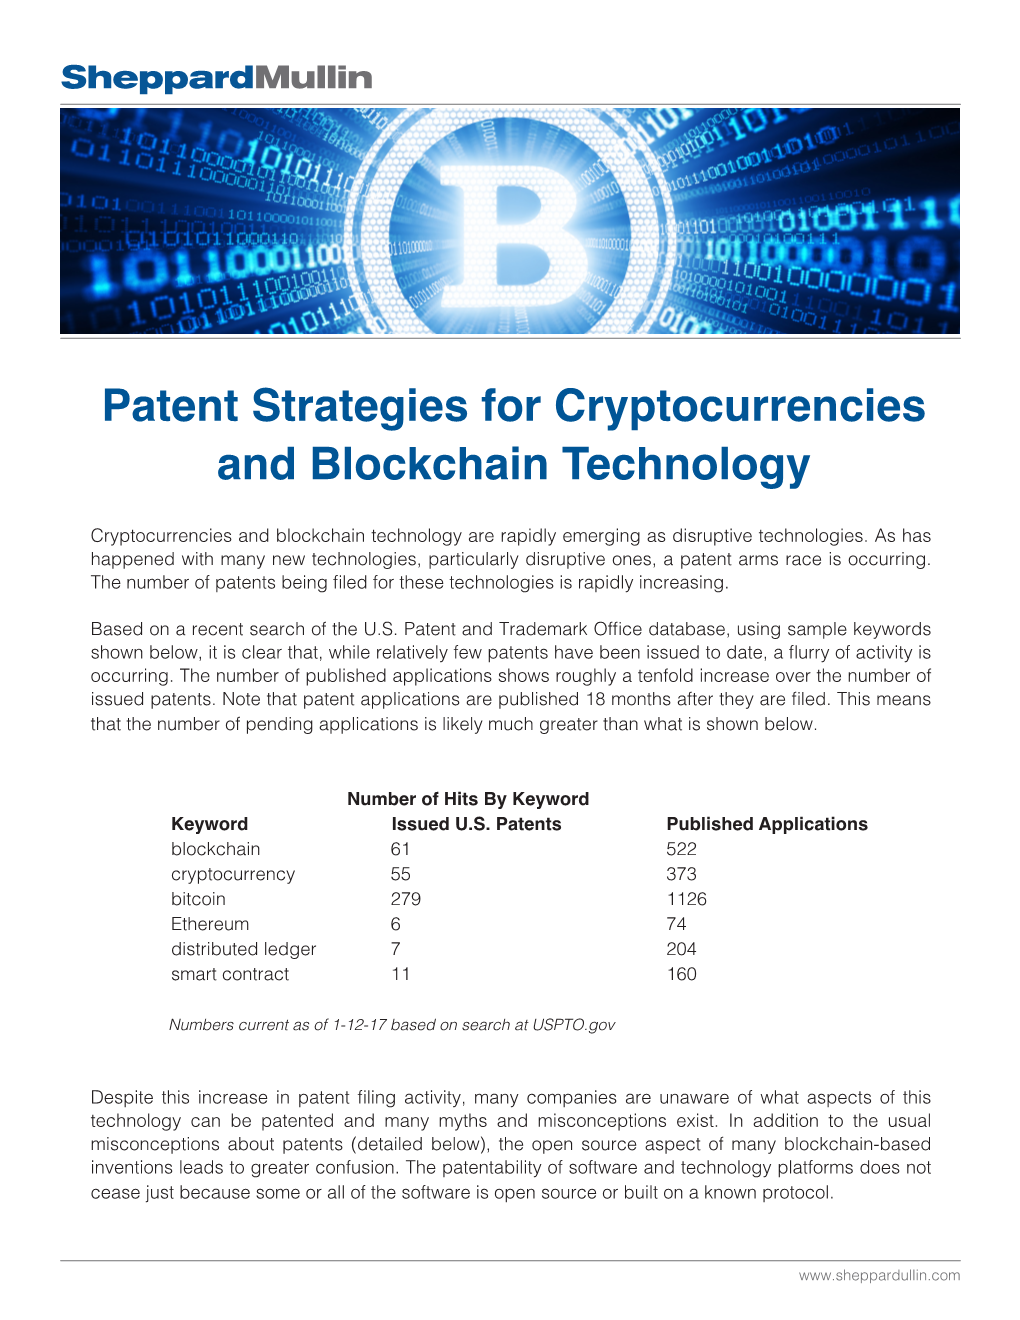 Patent Strategies for Cryptocurrencies and Blockchain Technology